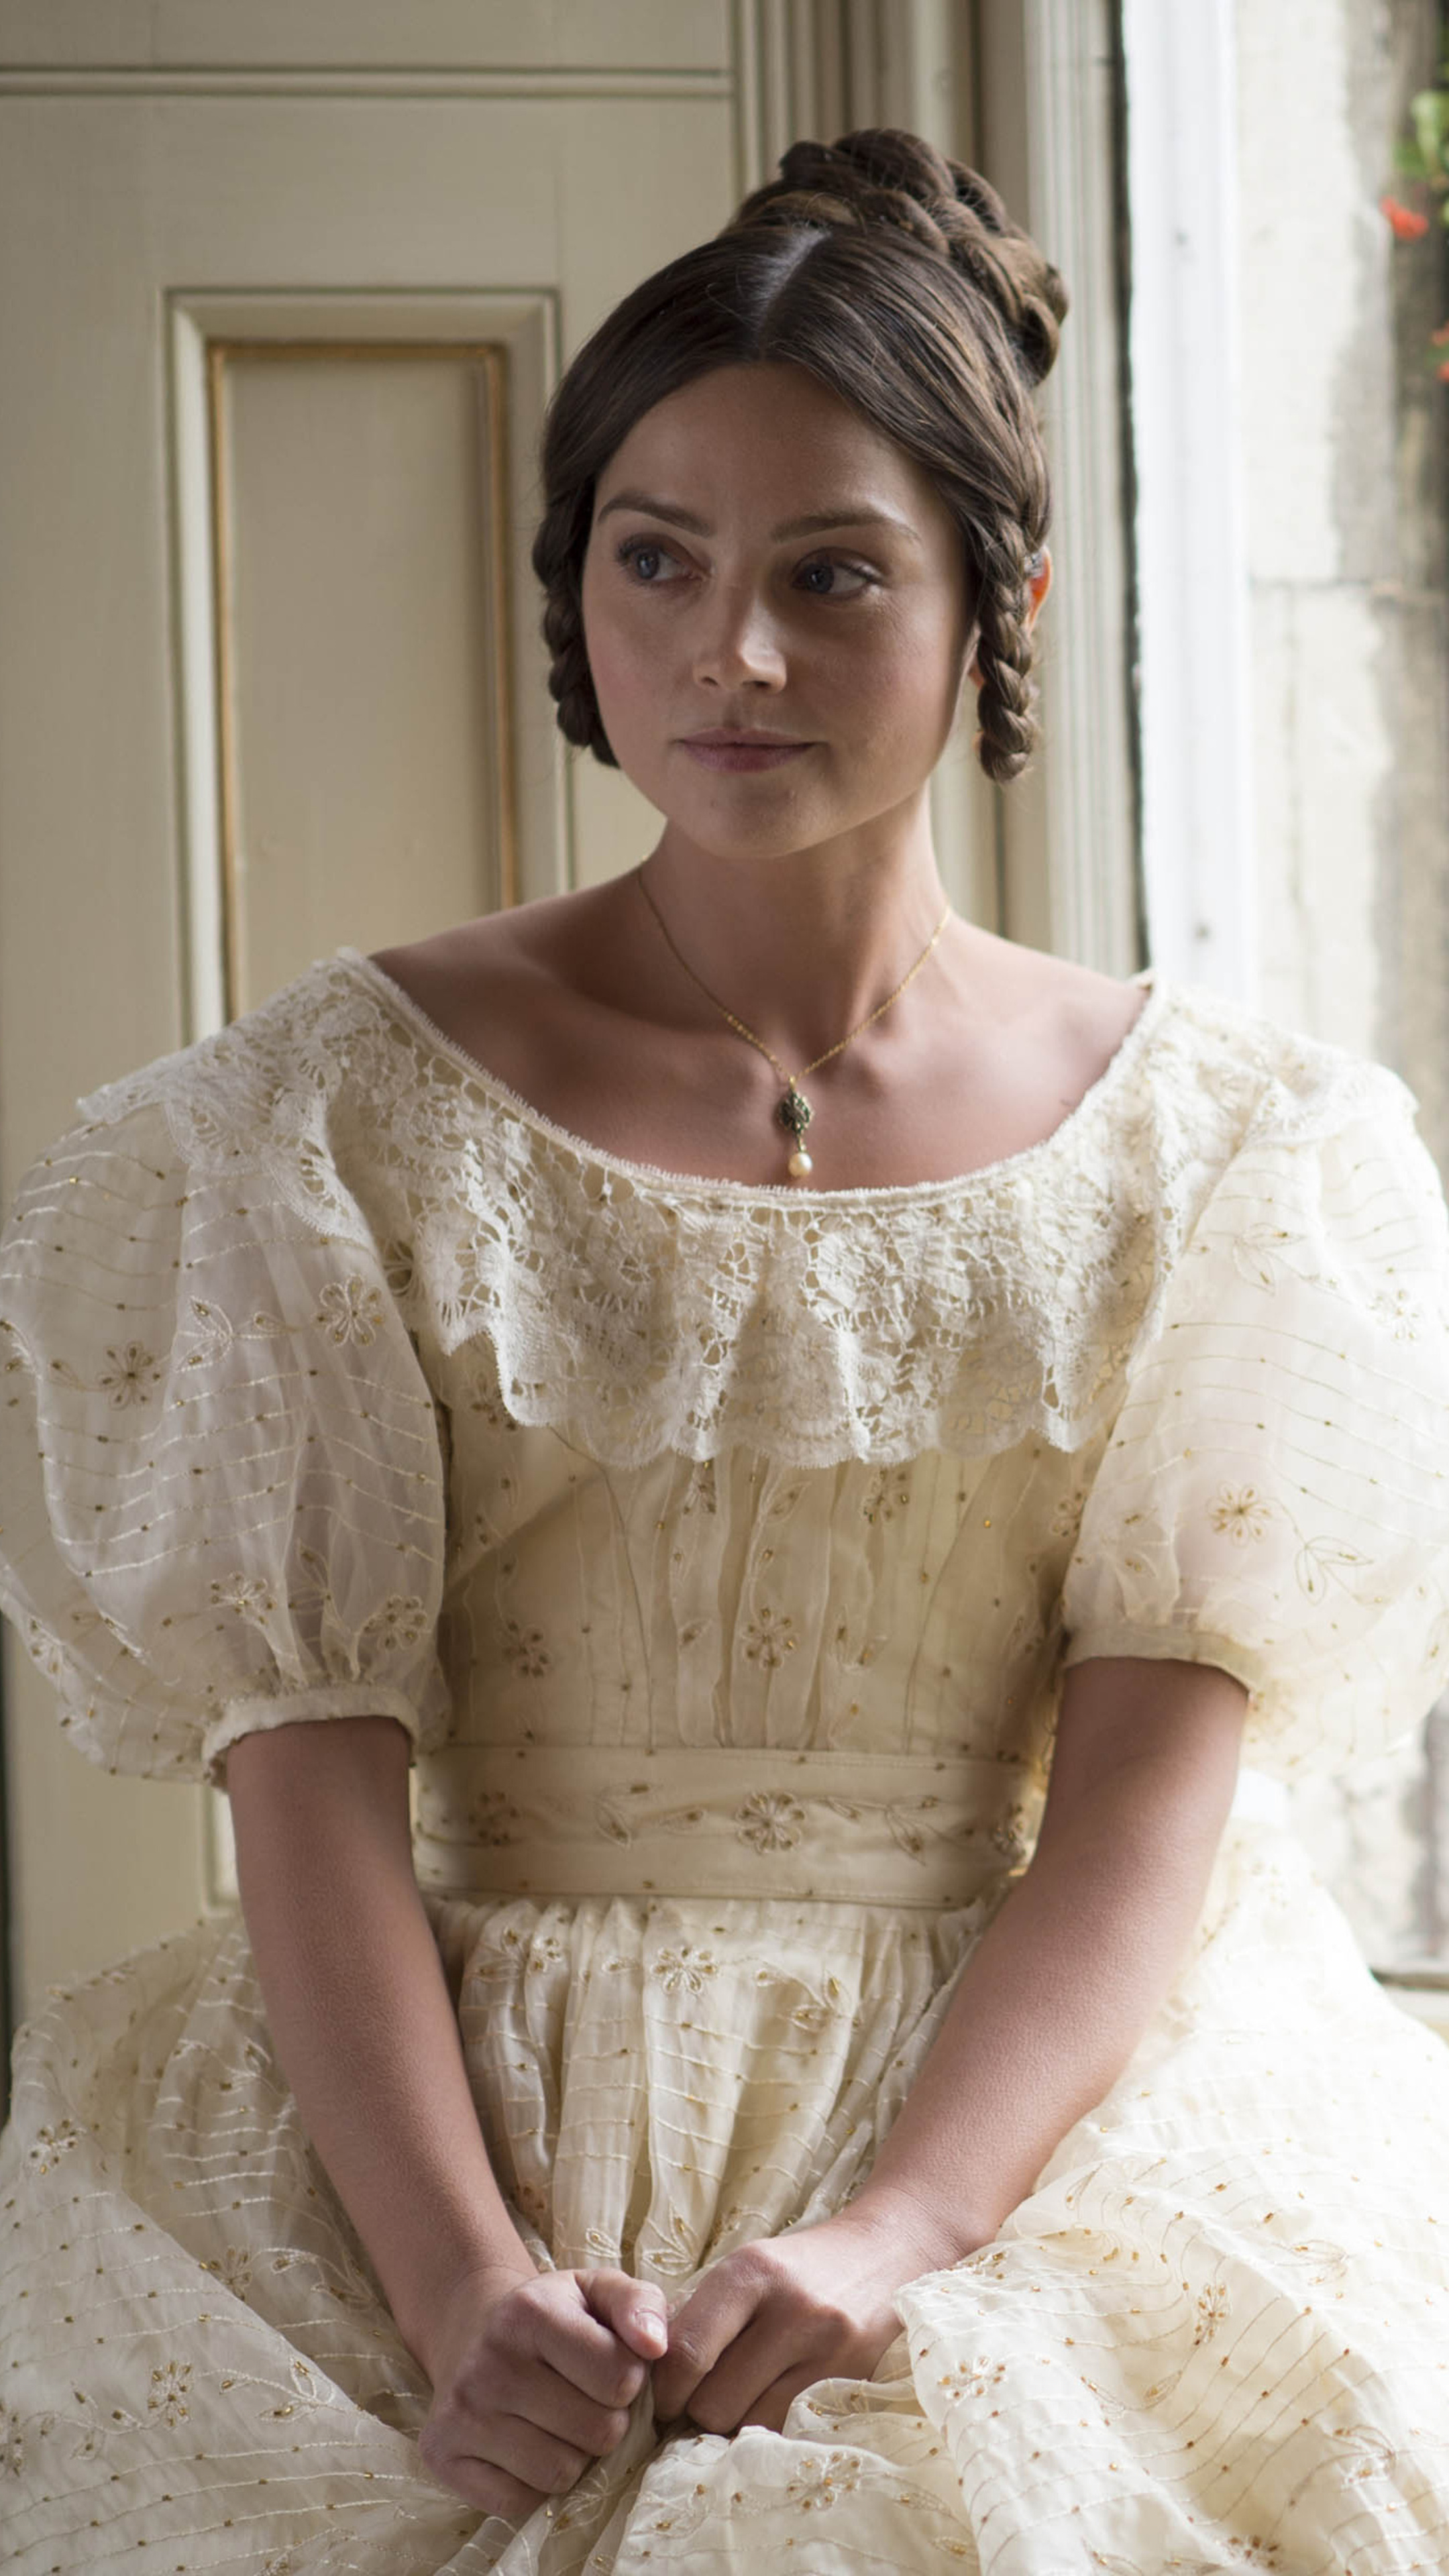 Jenna Coleman, Queen Victoria portrayal, Xperia phone wallpapers, Captivating images, 2160x3840 4K Phone